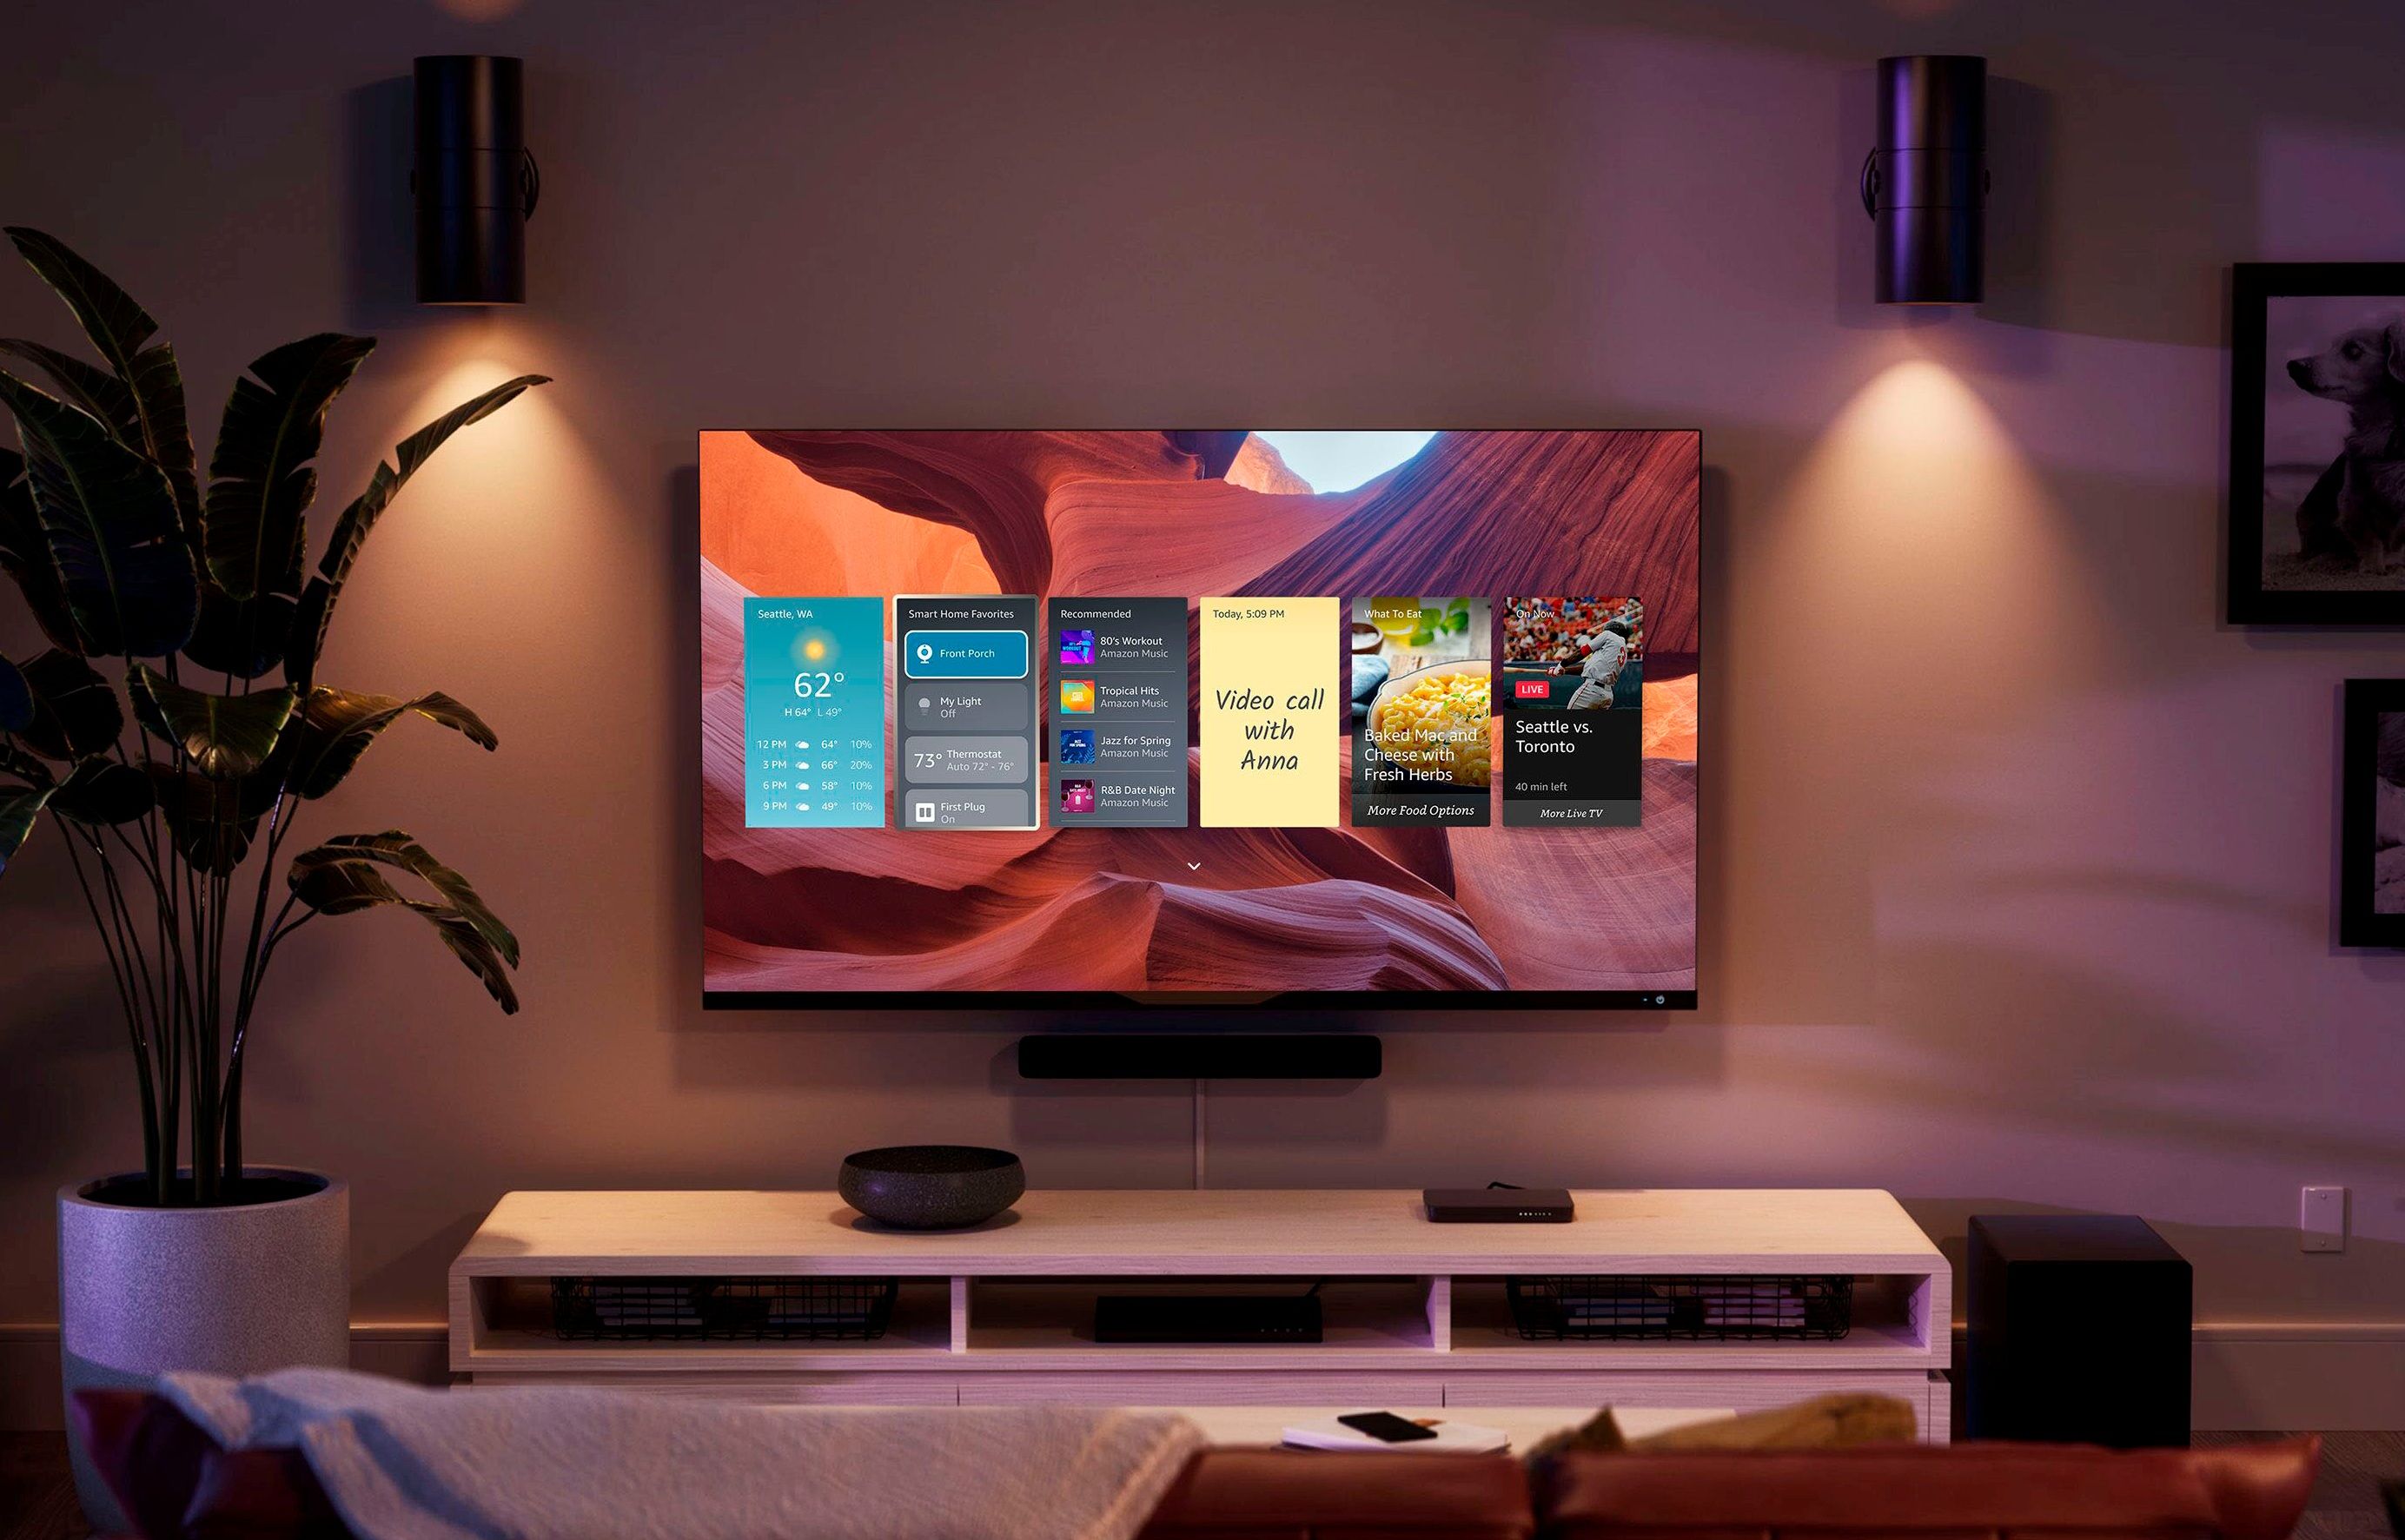 The Amazon Fire TV Ambient Experience